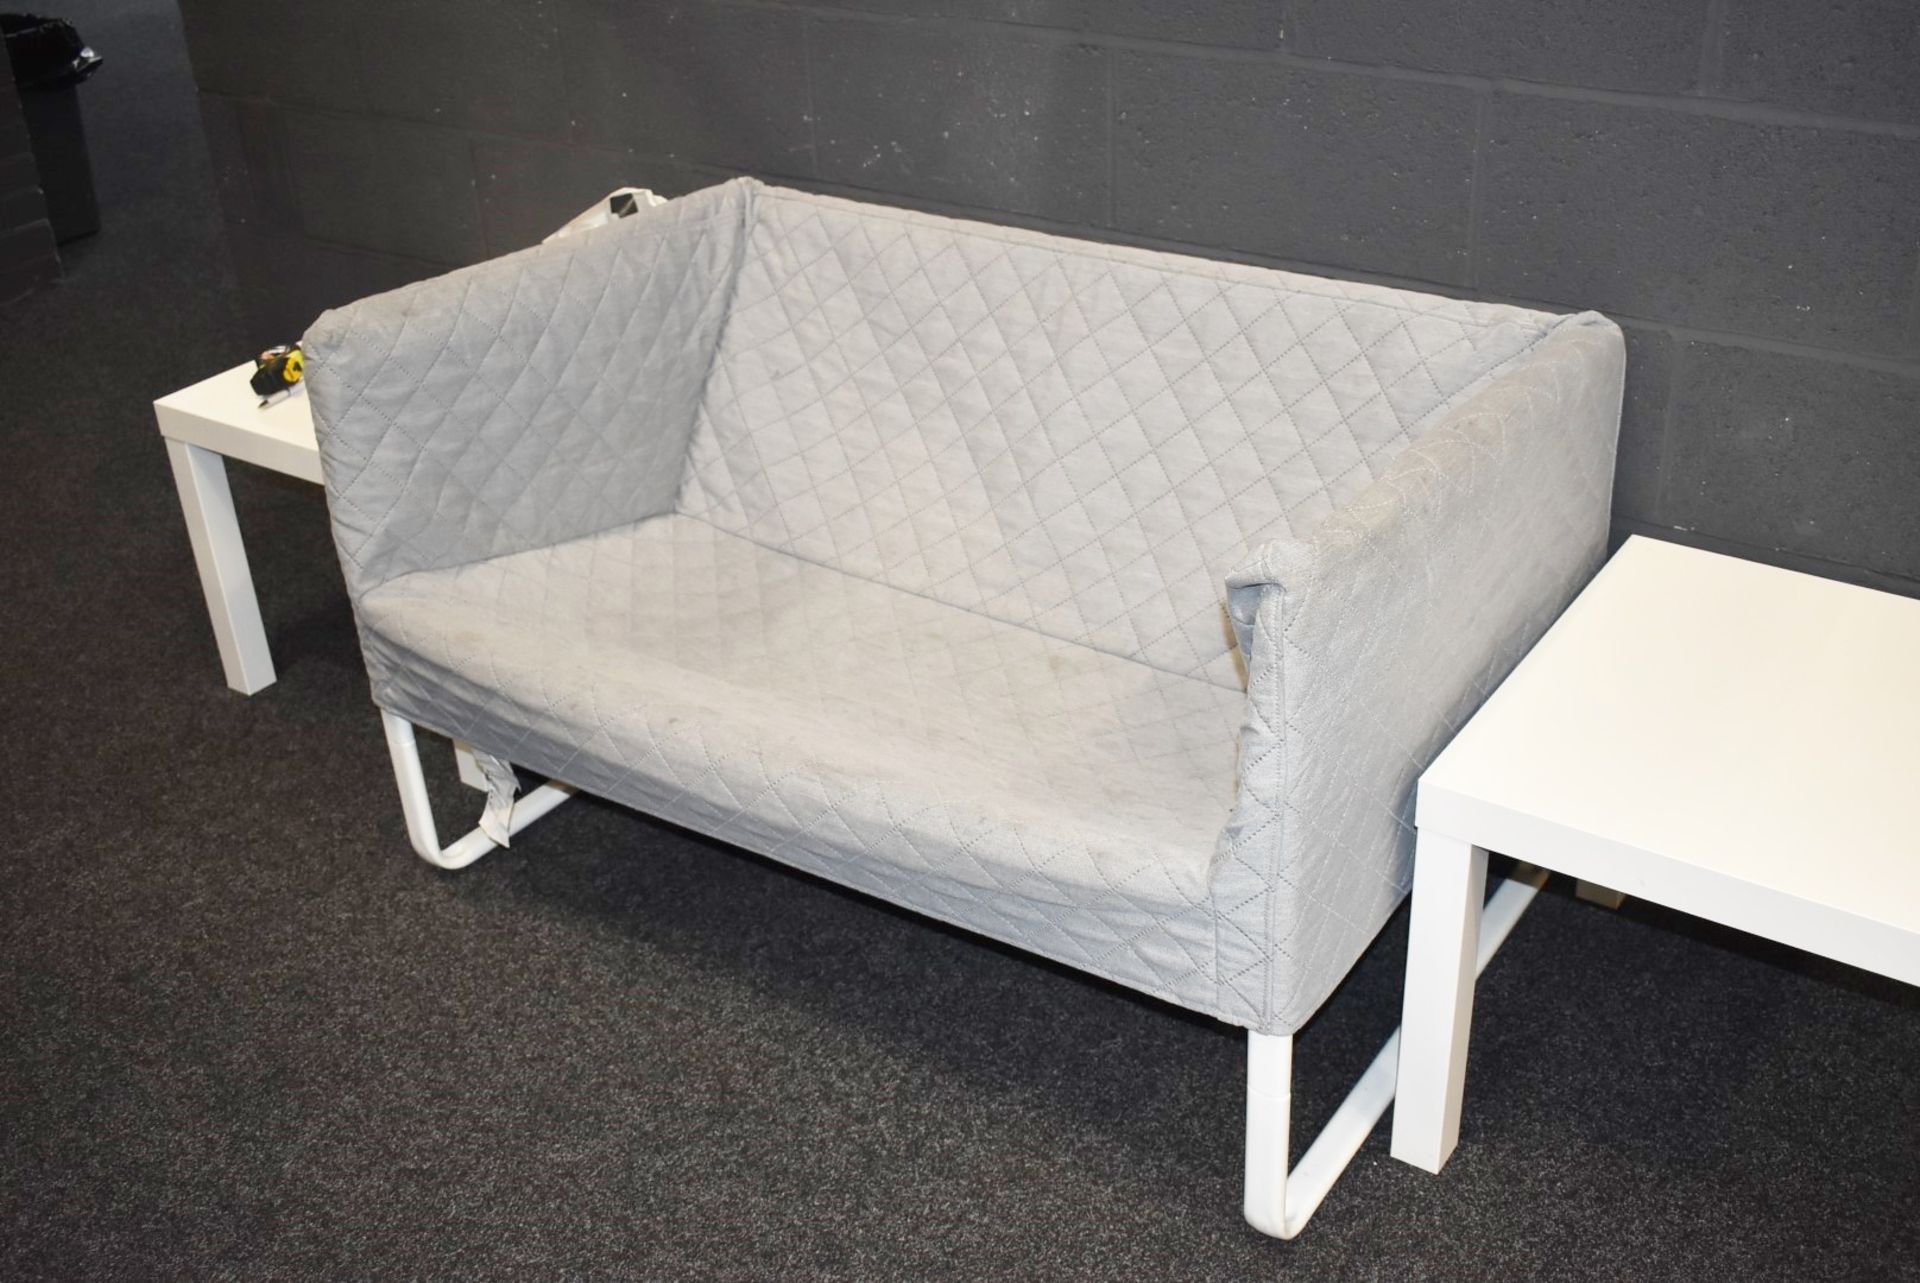 2 x Ikea Knopparp Two Seater Sofas in Light Grey - Features Removable Washable Padded Covers - Image 2 of 4